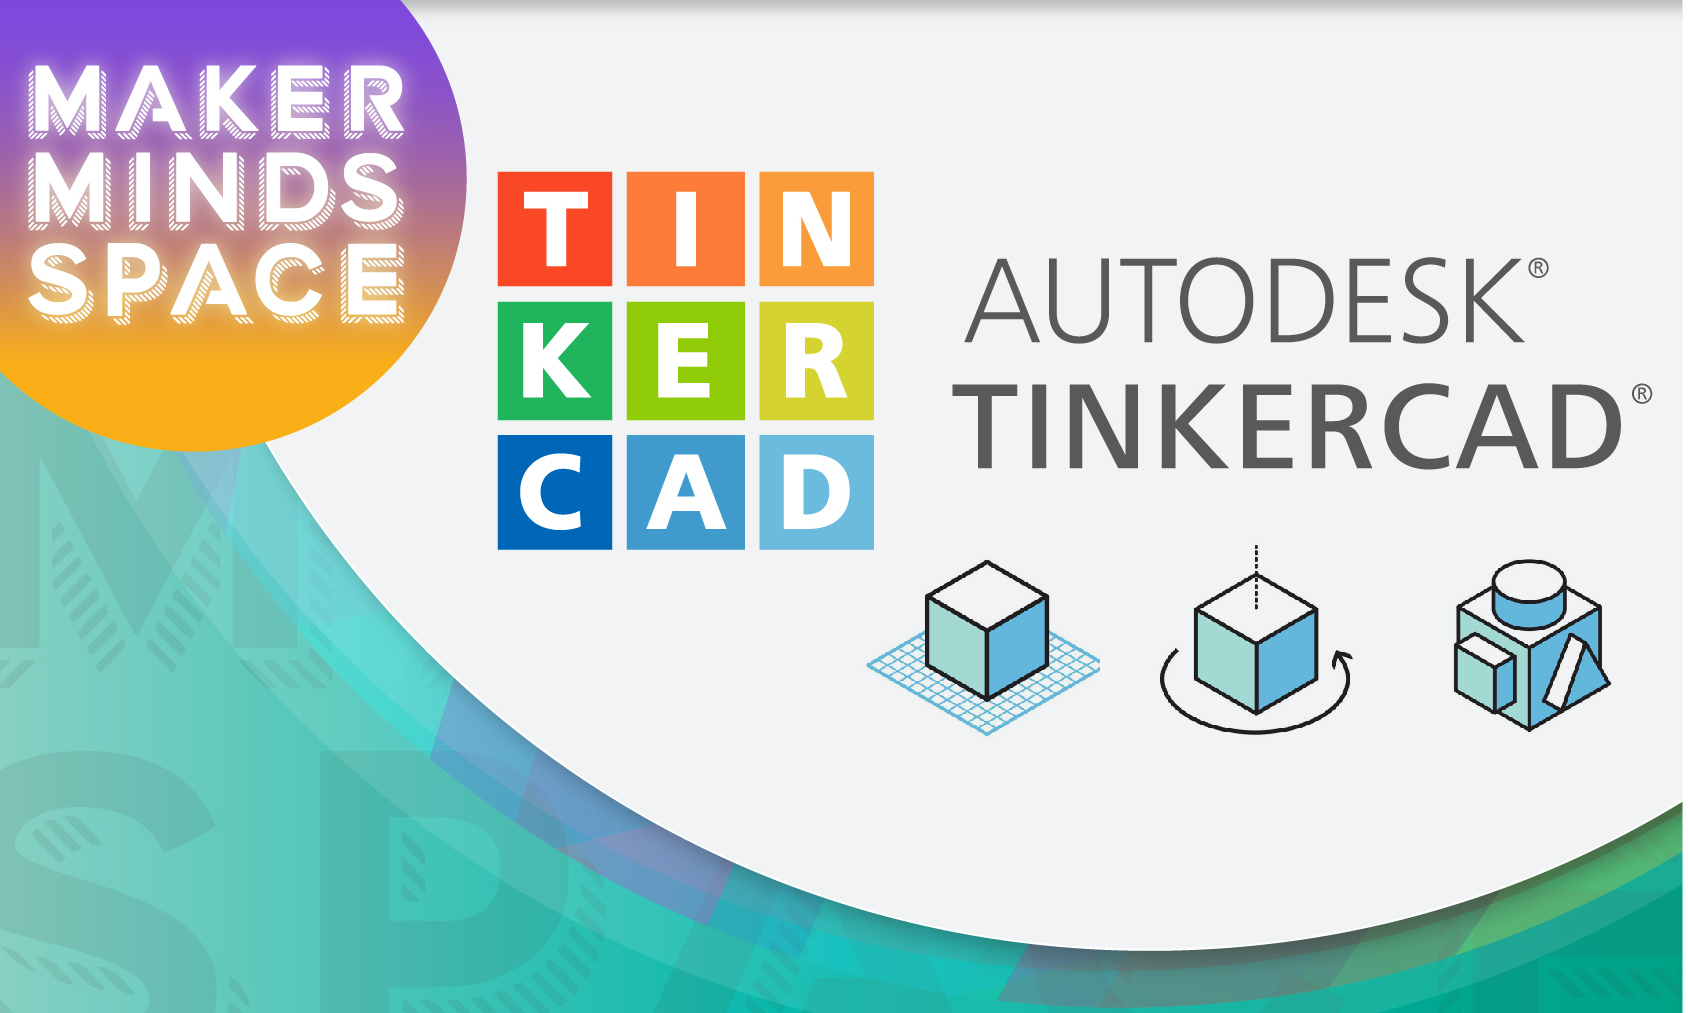 MakerMinds Space Autodesk Tinkercad poster